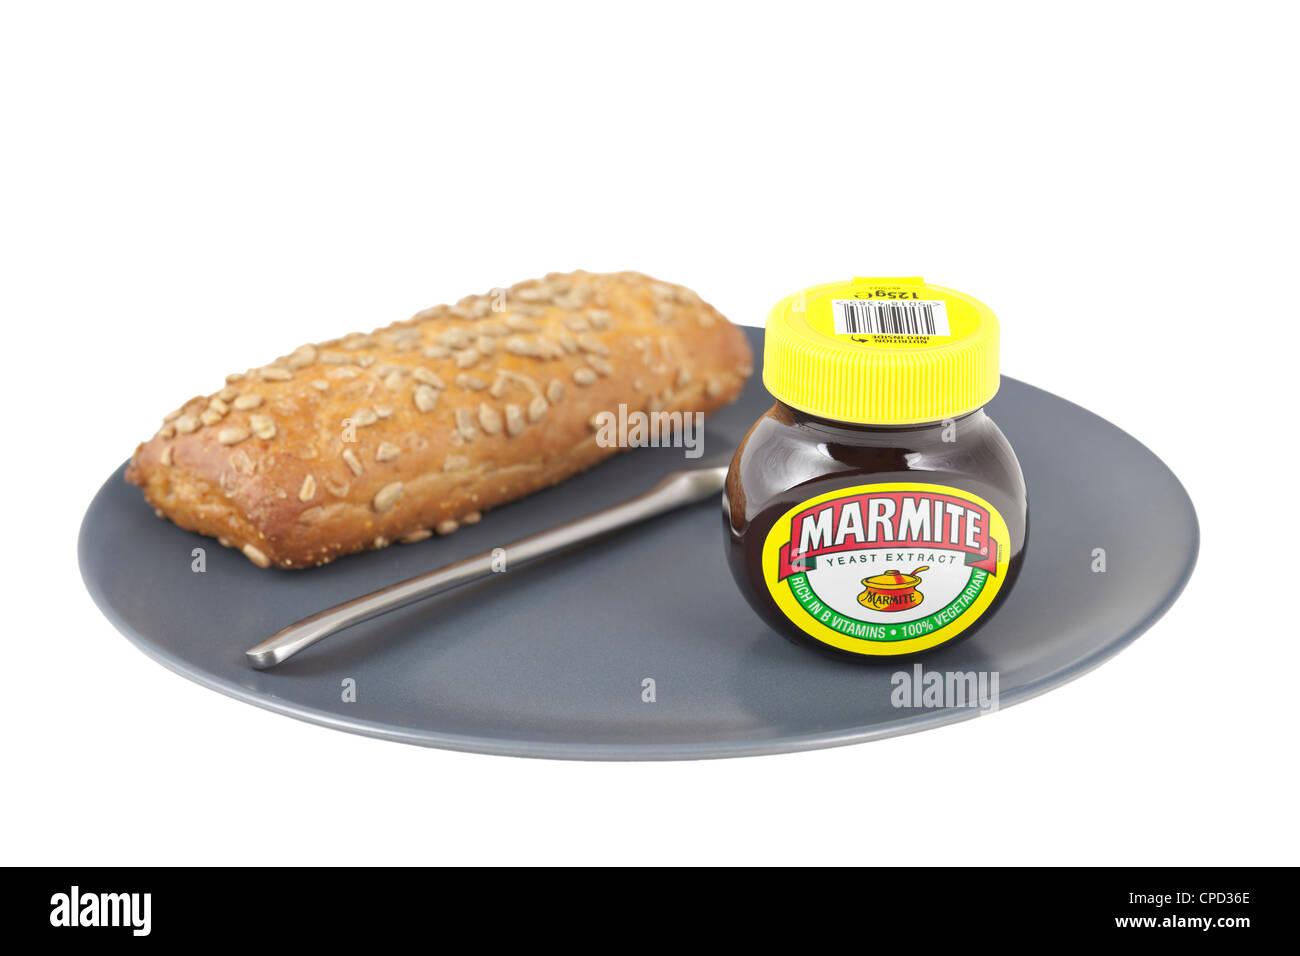 Marmite jar with bread on a plate Stock Photo